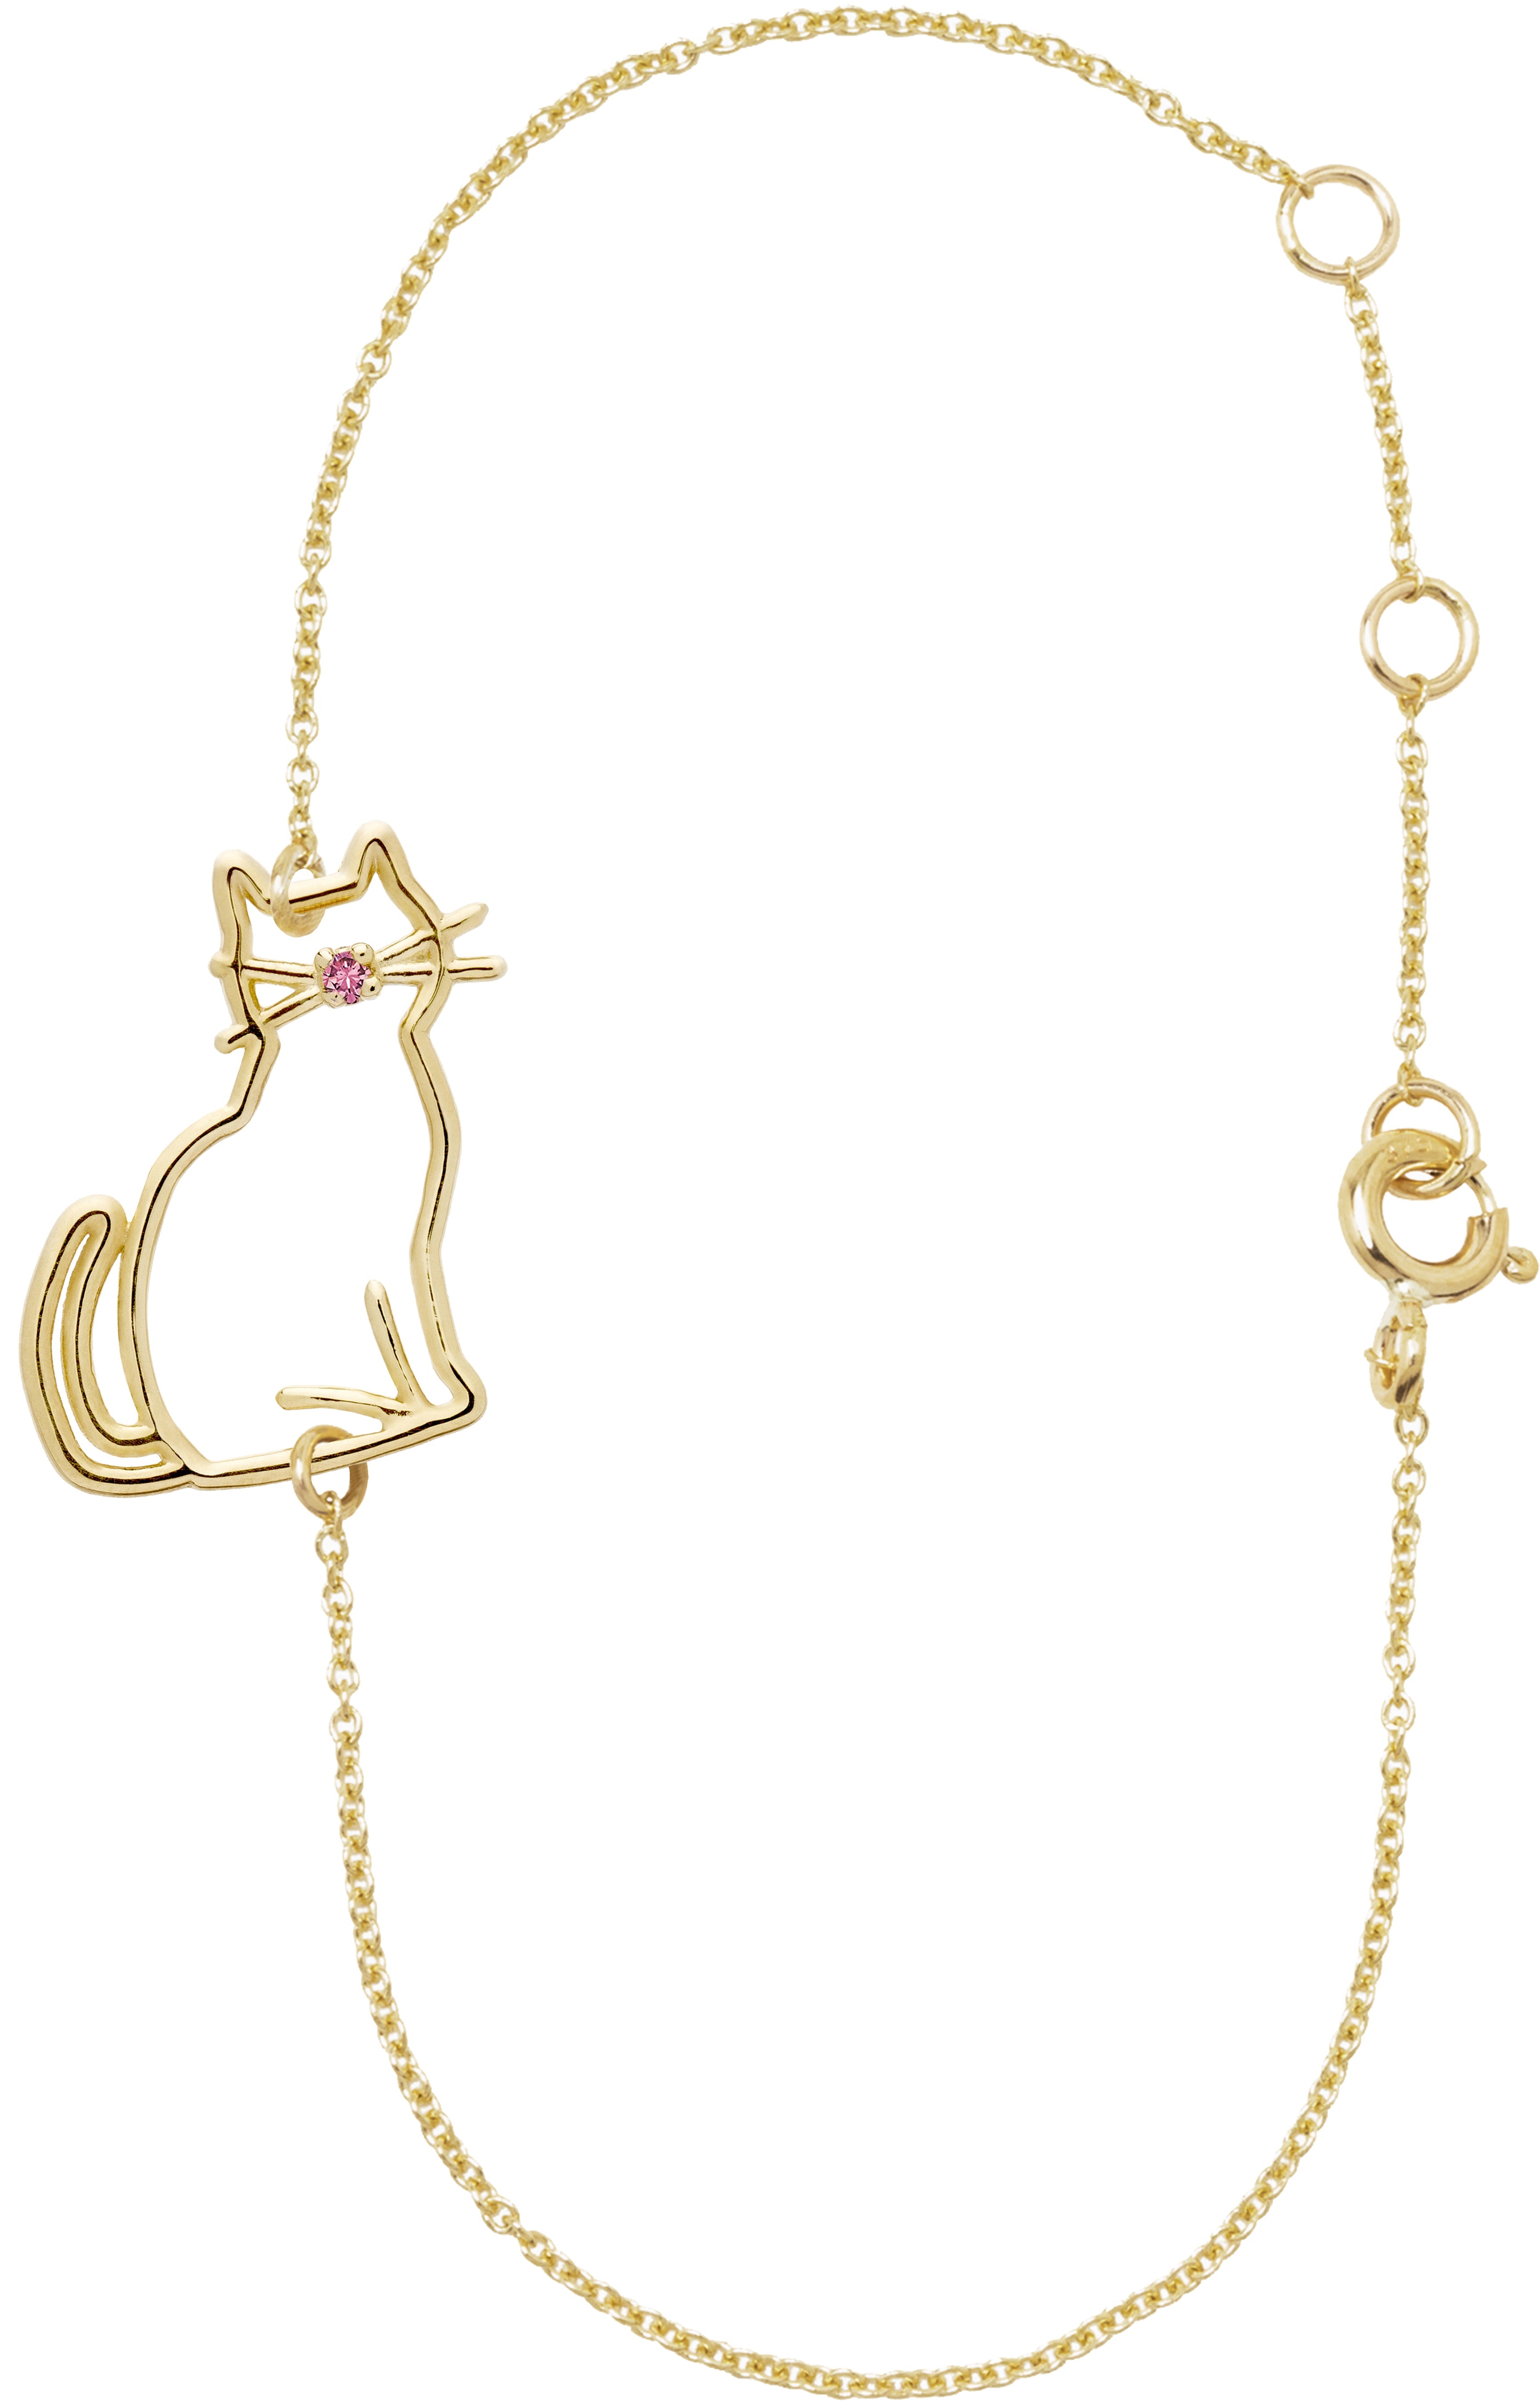 Gold chain bracelet with a small seated cat shaped pendant and a pink sapphire nose